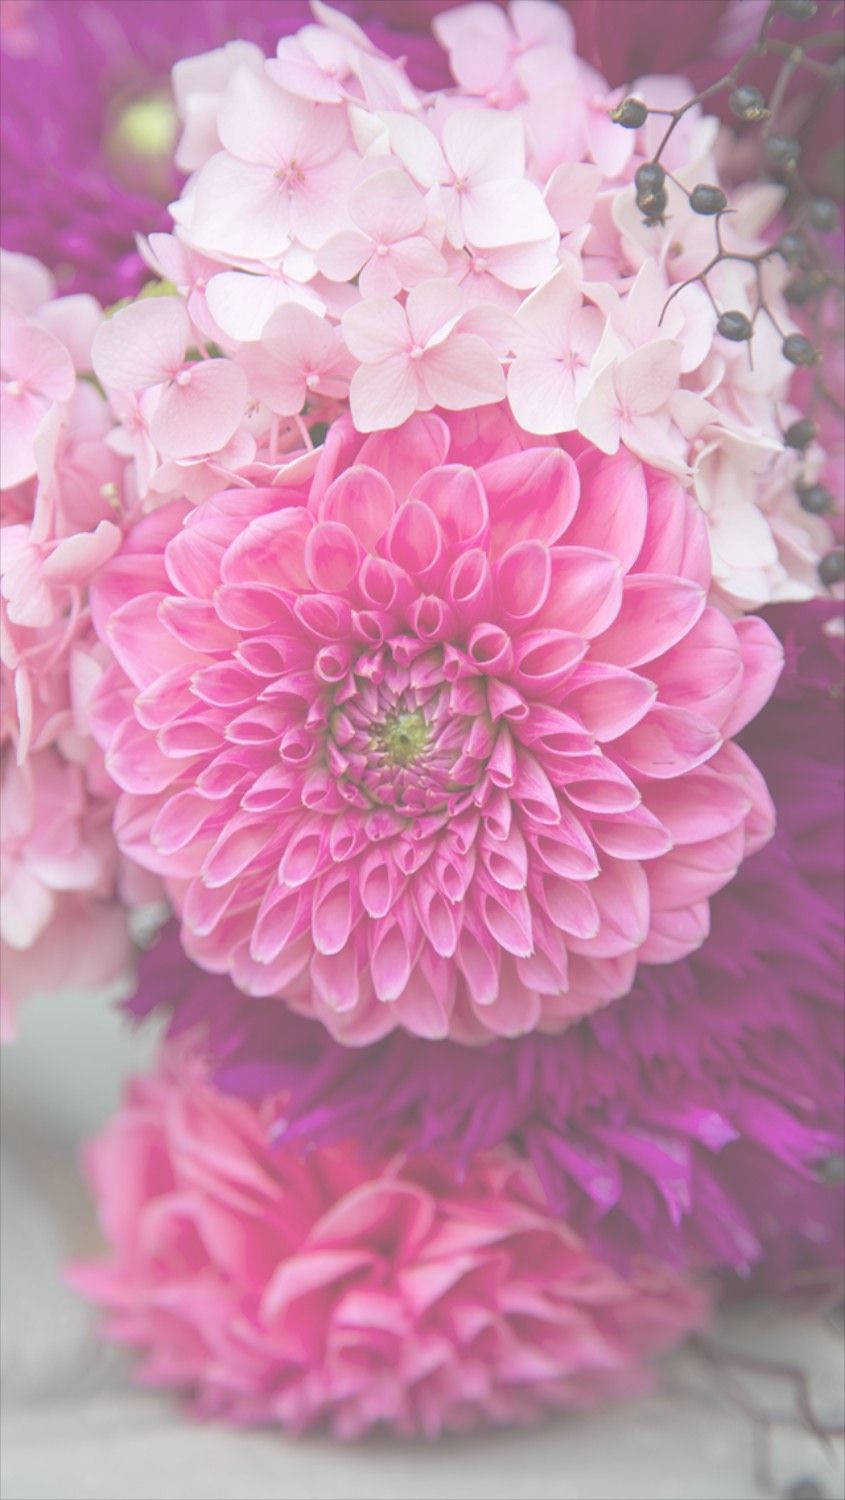 Pink Dahlia Blomster Iphone Wallpaper